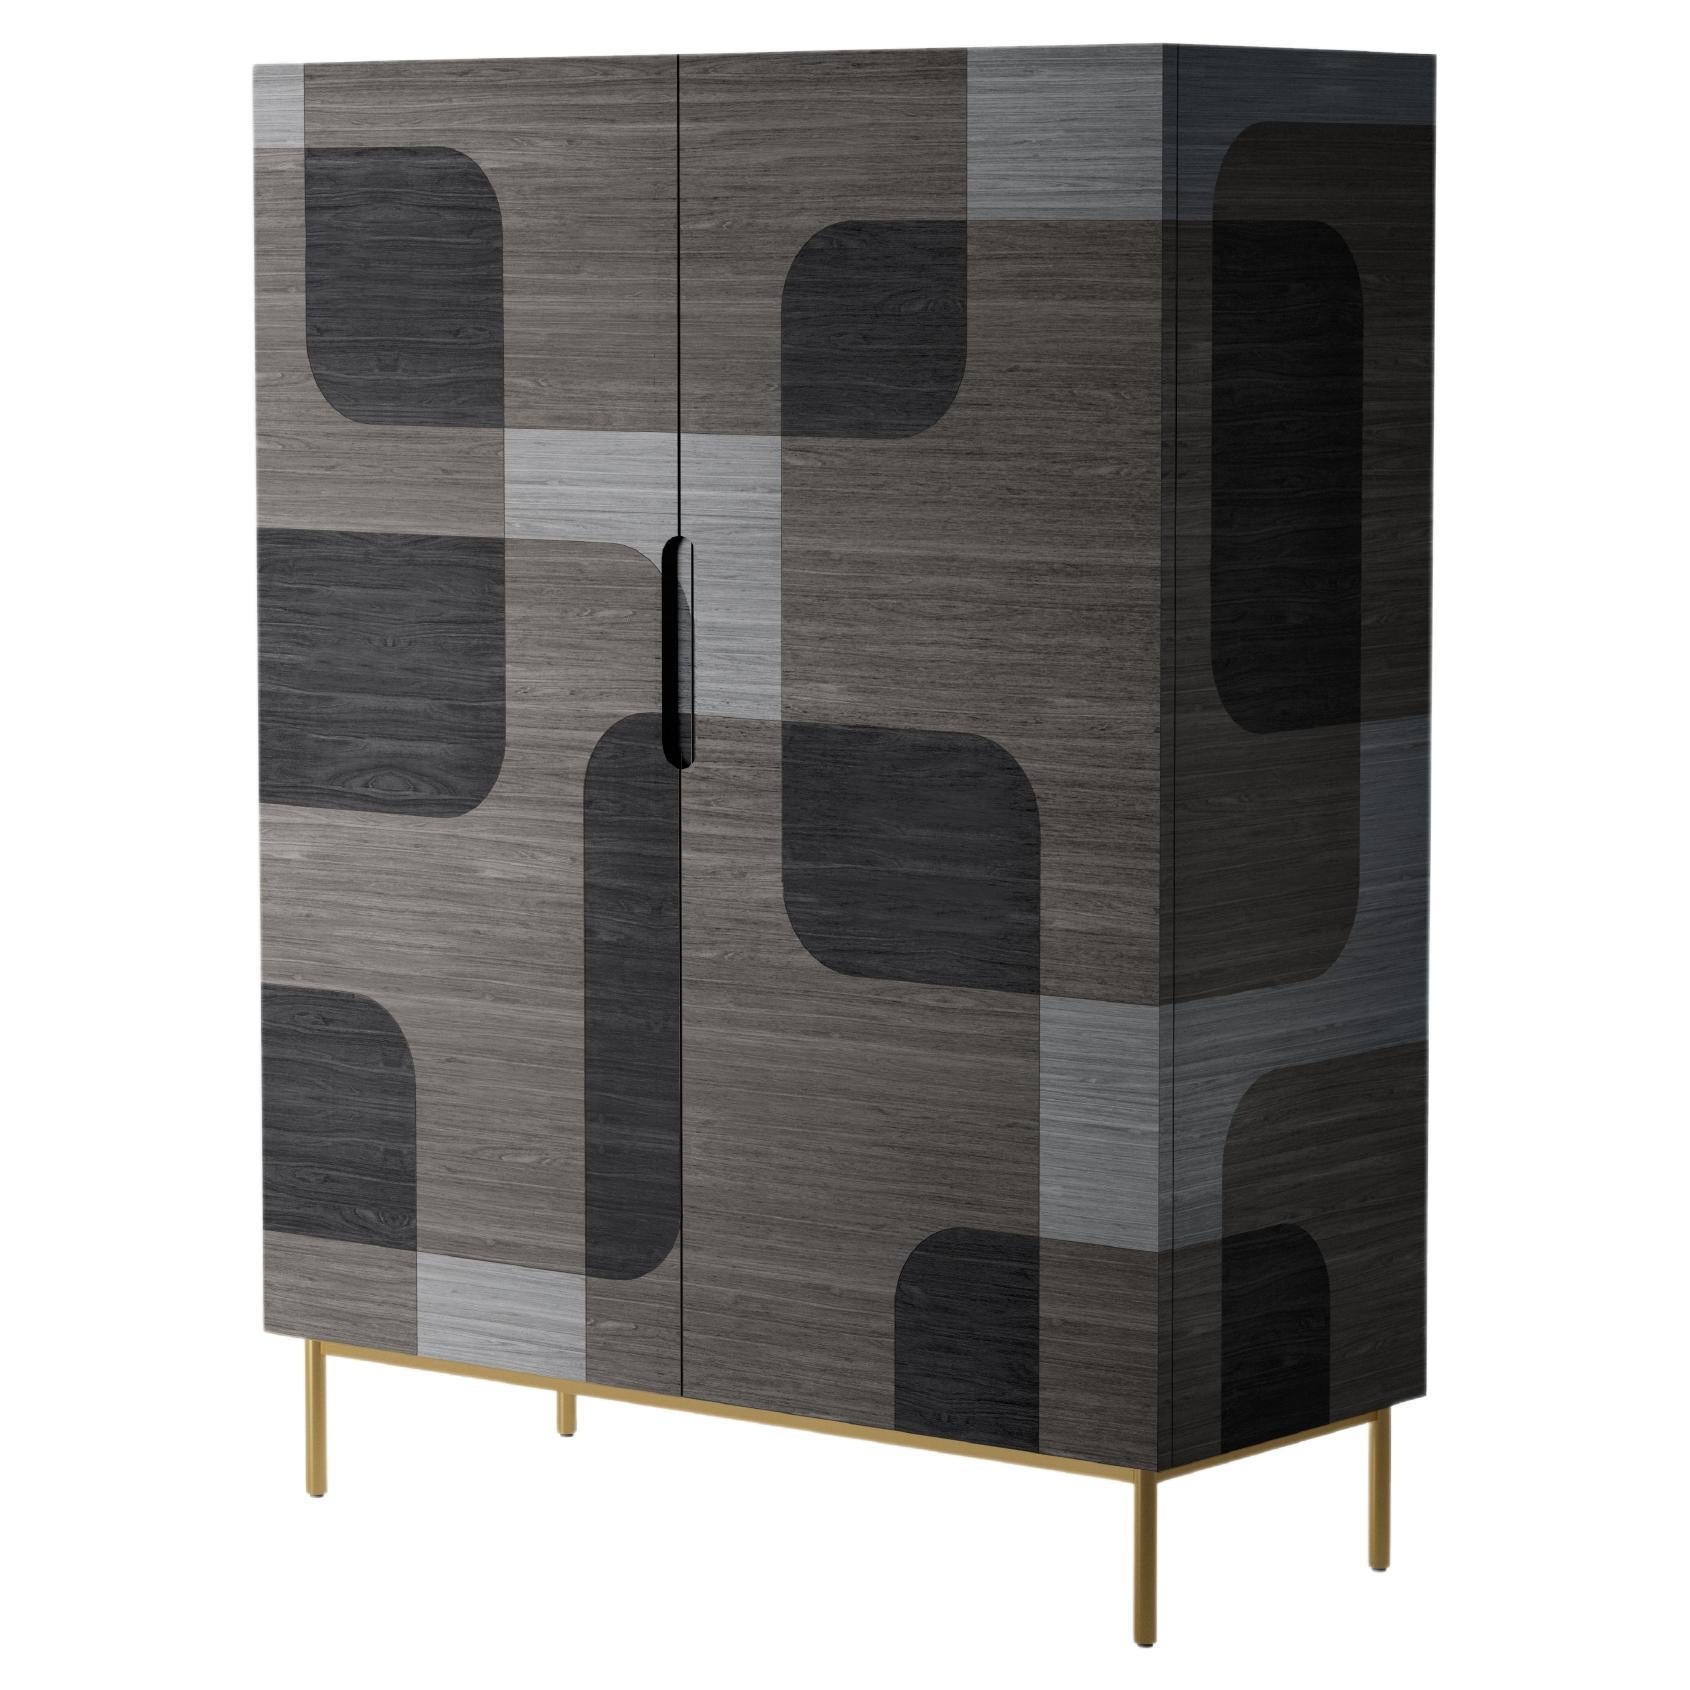 BODEGA CABINET

Bodega Collection refers to cellar art or better known as chiaroscuro, a technique of extreme contrast of light and shadow used by Caravaggio.

Cabinet designed by Joel Escalona, configured with two doors, three internal compartments